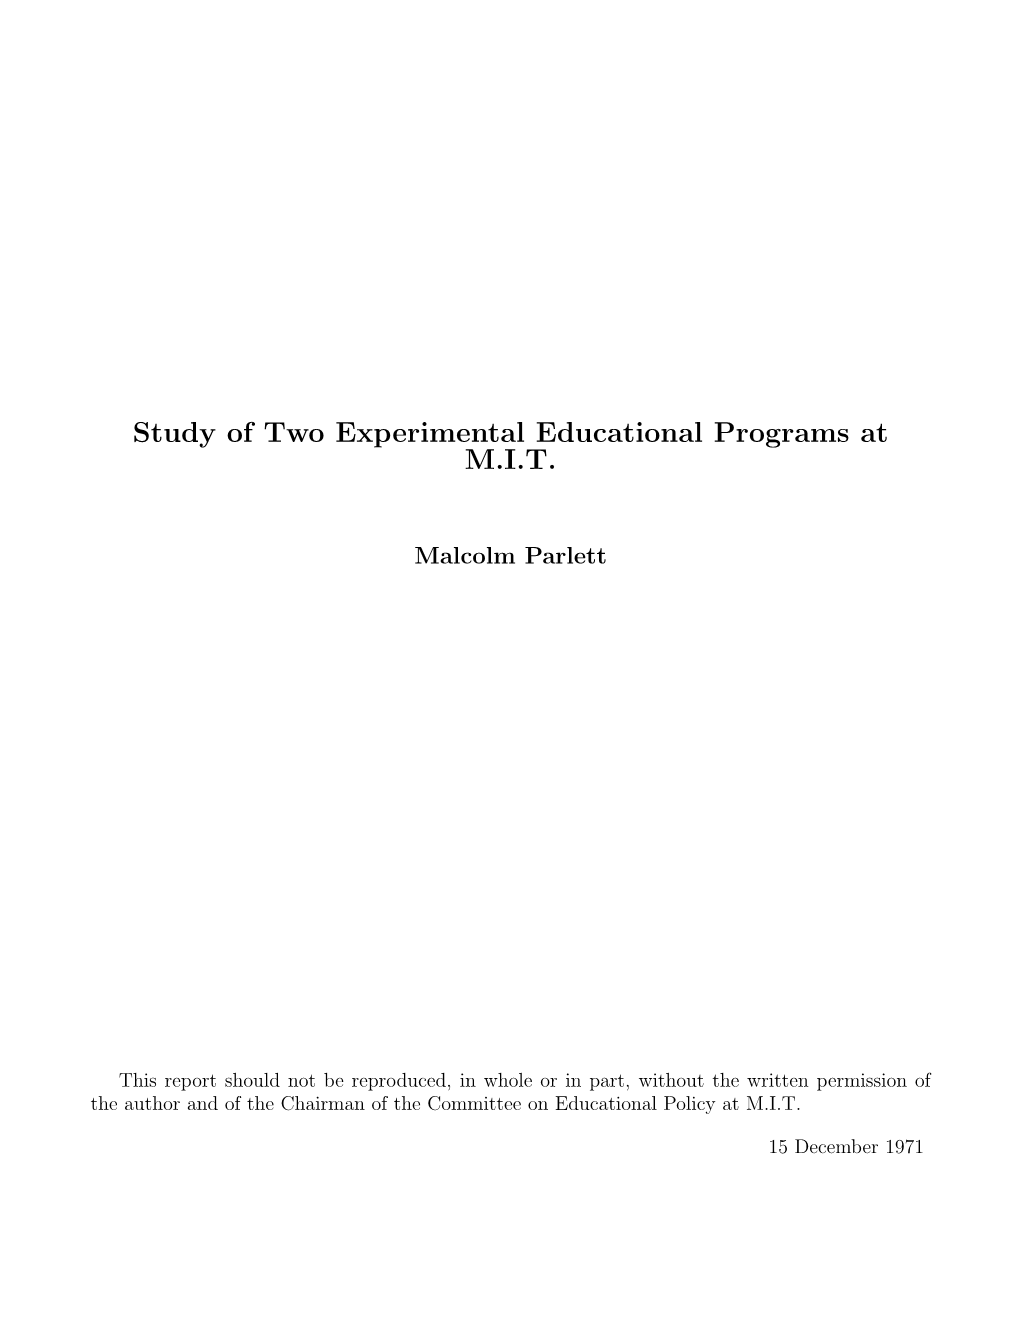 Study of Two Experimental Educational Programs at M.I.T